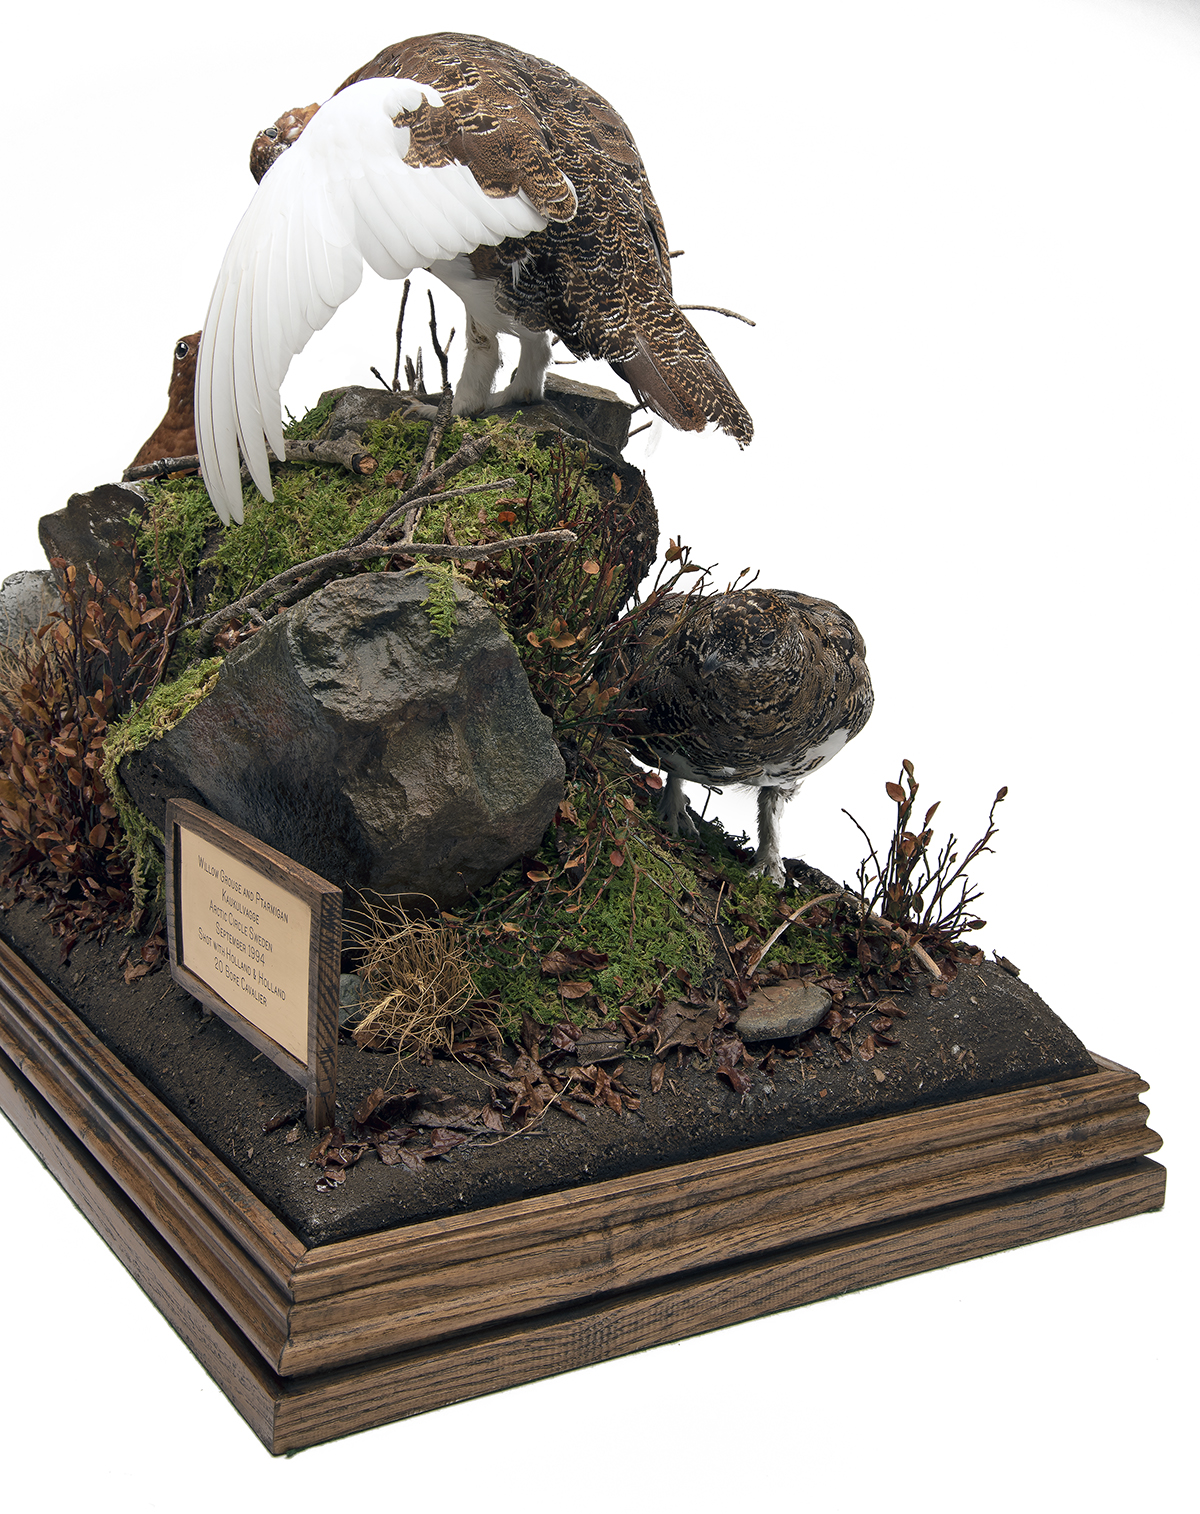 A FINE CASED DISPLAY OF WILLOW GROUSE AND PTARMIGAN, showing two full-mounts of willow grouse and - Image 2 of 3